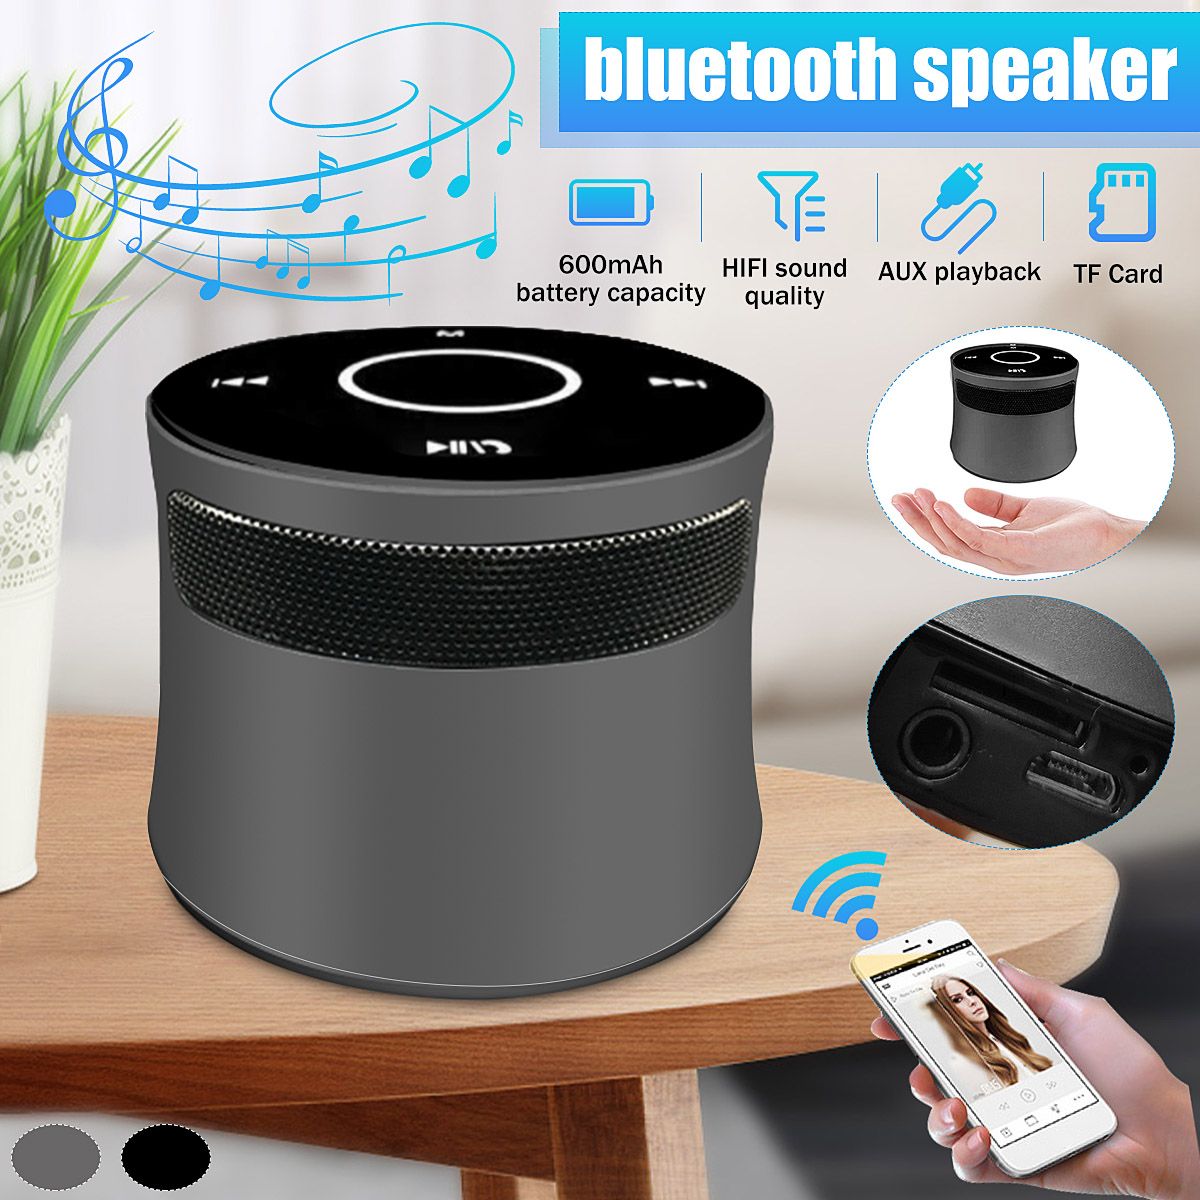 Bakeey-600mAh-TF-Card-Wireless-bluetooth-Speaker-AUX-Playback-HIFI-Sound-Player-Support-A2DP-AVRCP-H-1642267